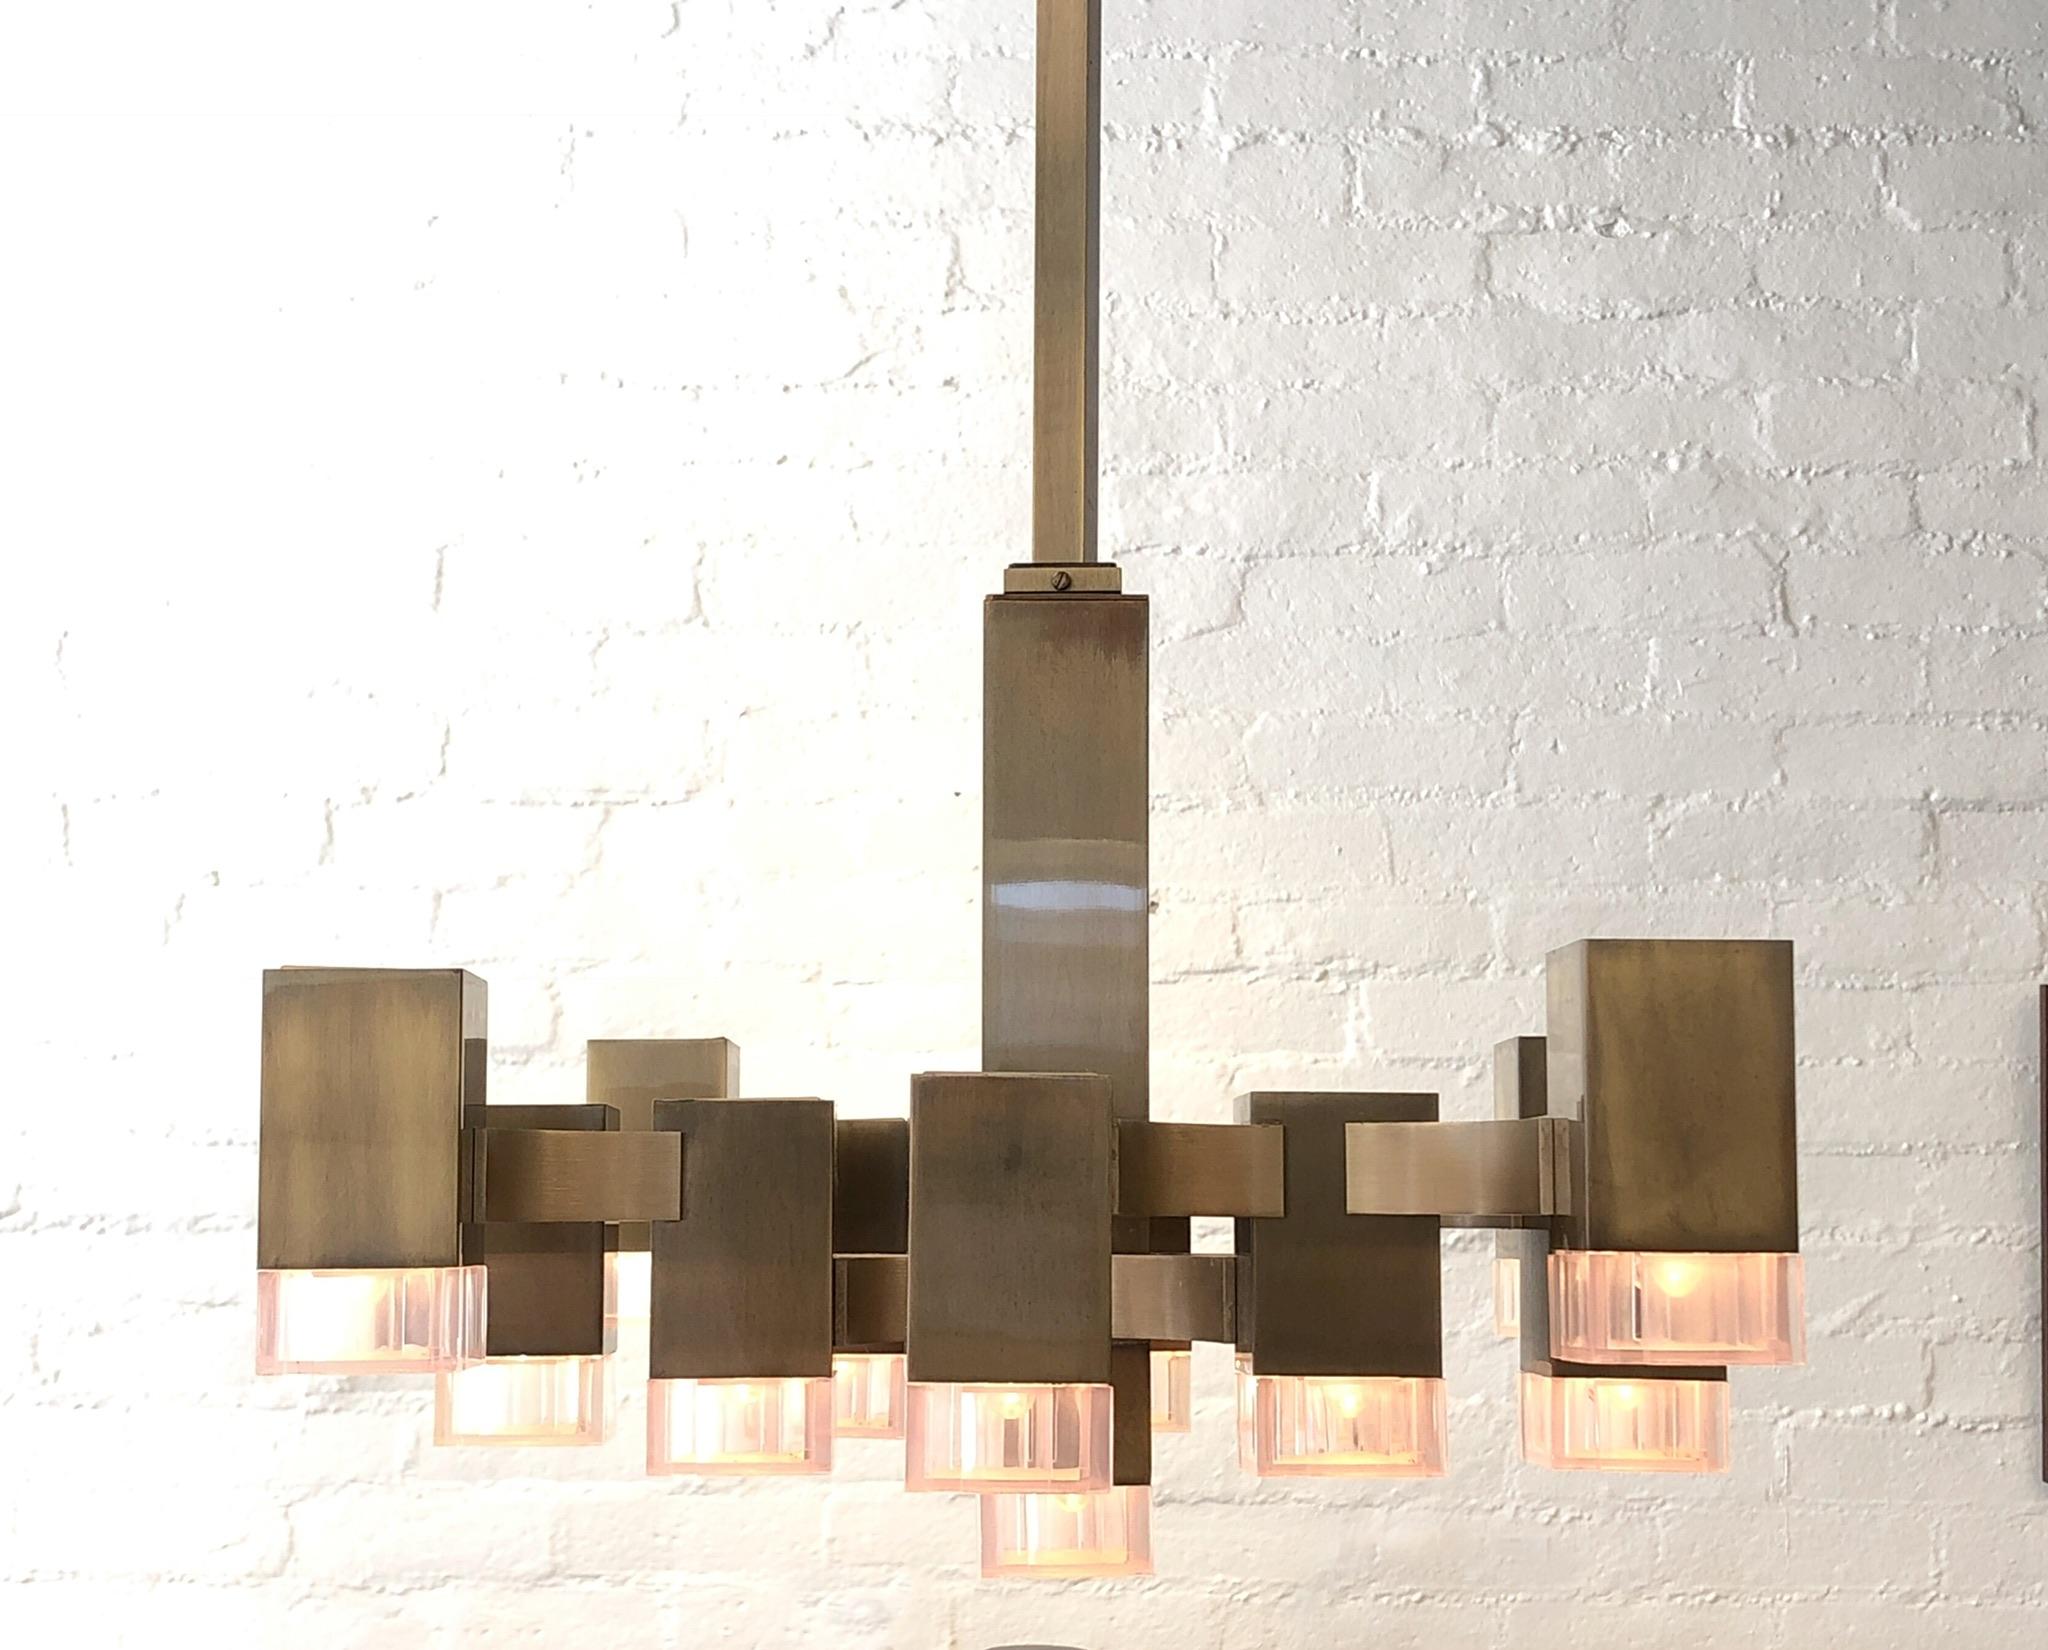 A spectacular cubic chandelier designed in the 1970s by Italian designer Gaetano Sciolari for Lightolier. The chandelier has a beautiful antique brass finish and acrylic light covers. The chandelier retains the Made in Italy and Lightolier labels on